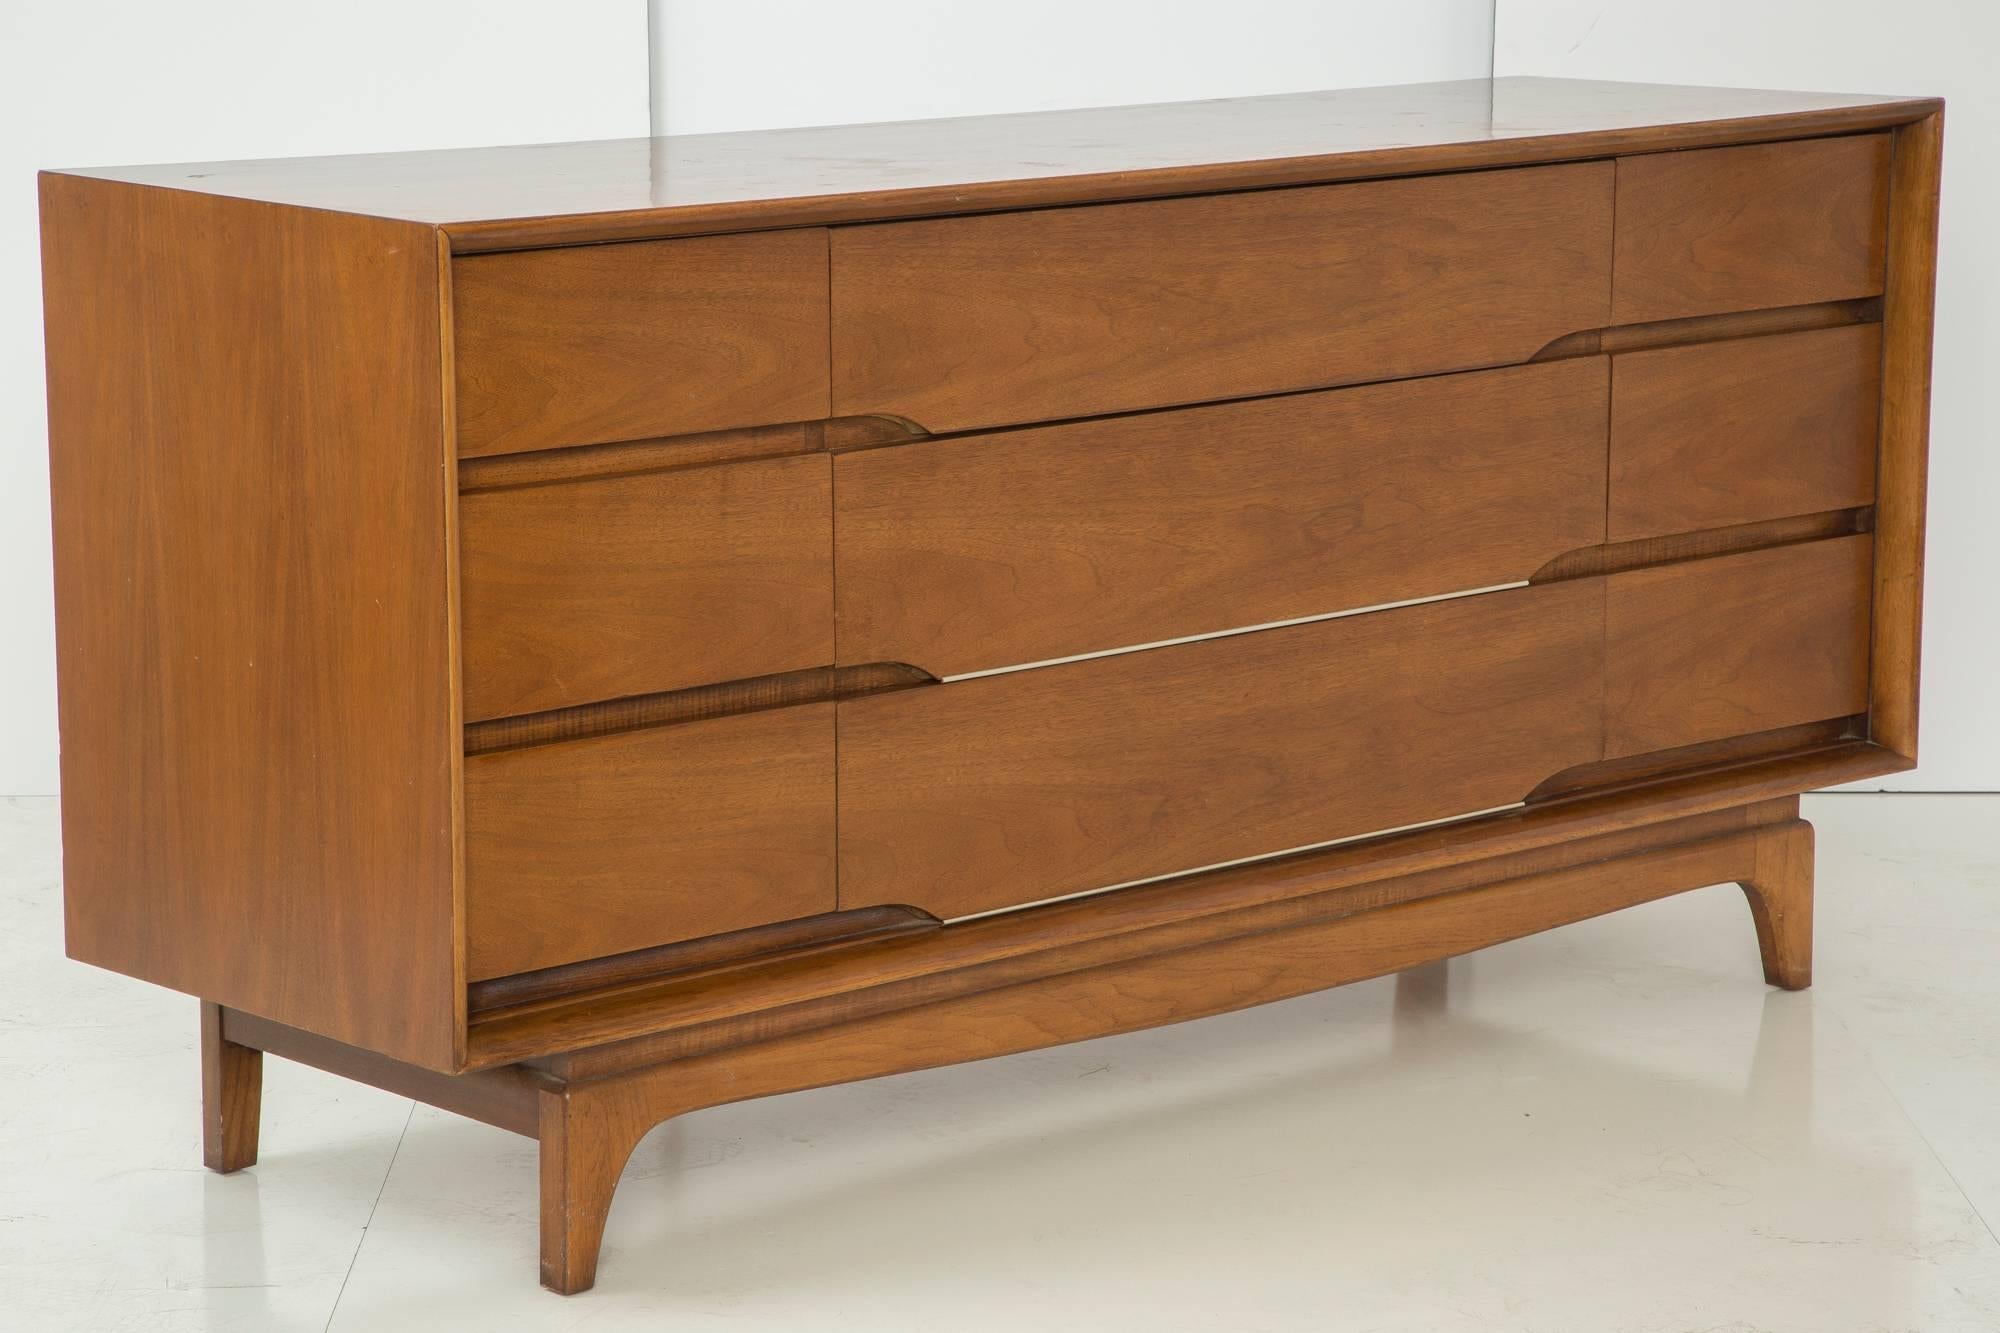 This beautiful Kent Coffey dresser is part of a beautiful Danish bedroom set which can be sold together for a lower price. Please inquire. Set includes the dresser featured in this listing, a chest of drawers, a mirror and a headboard. 

This